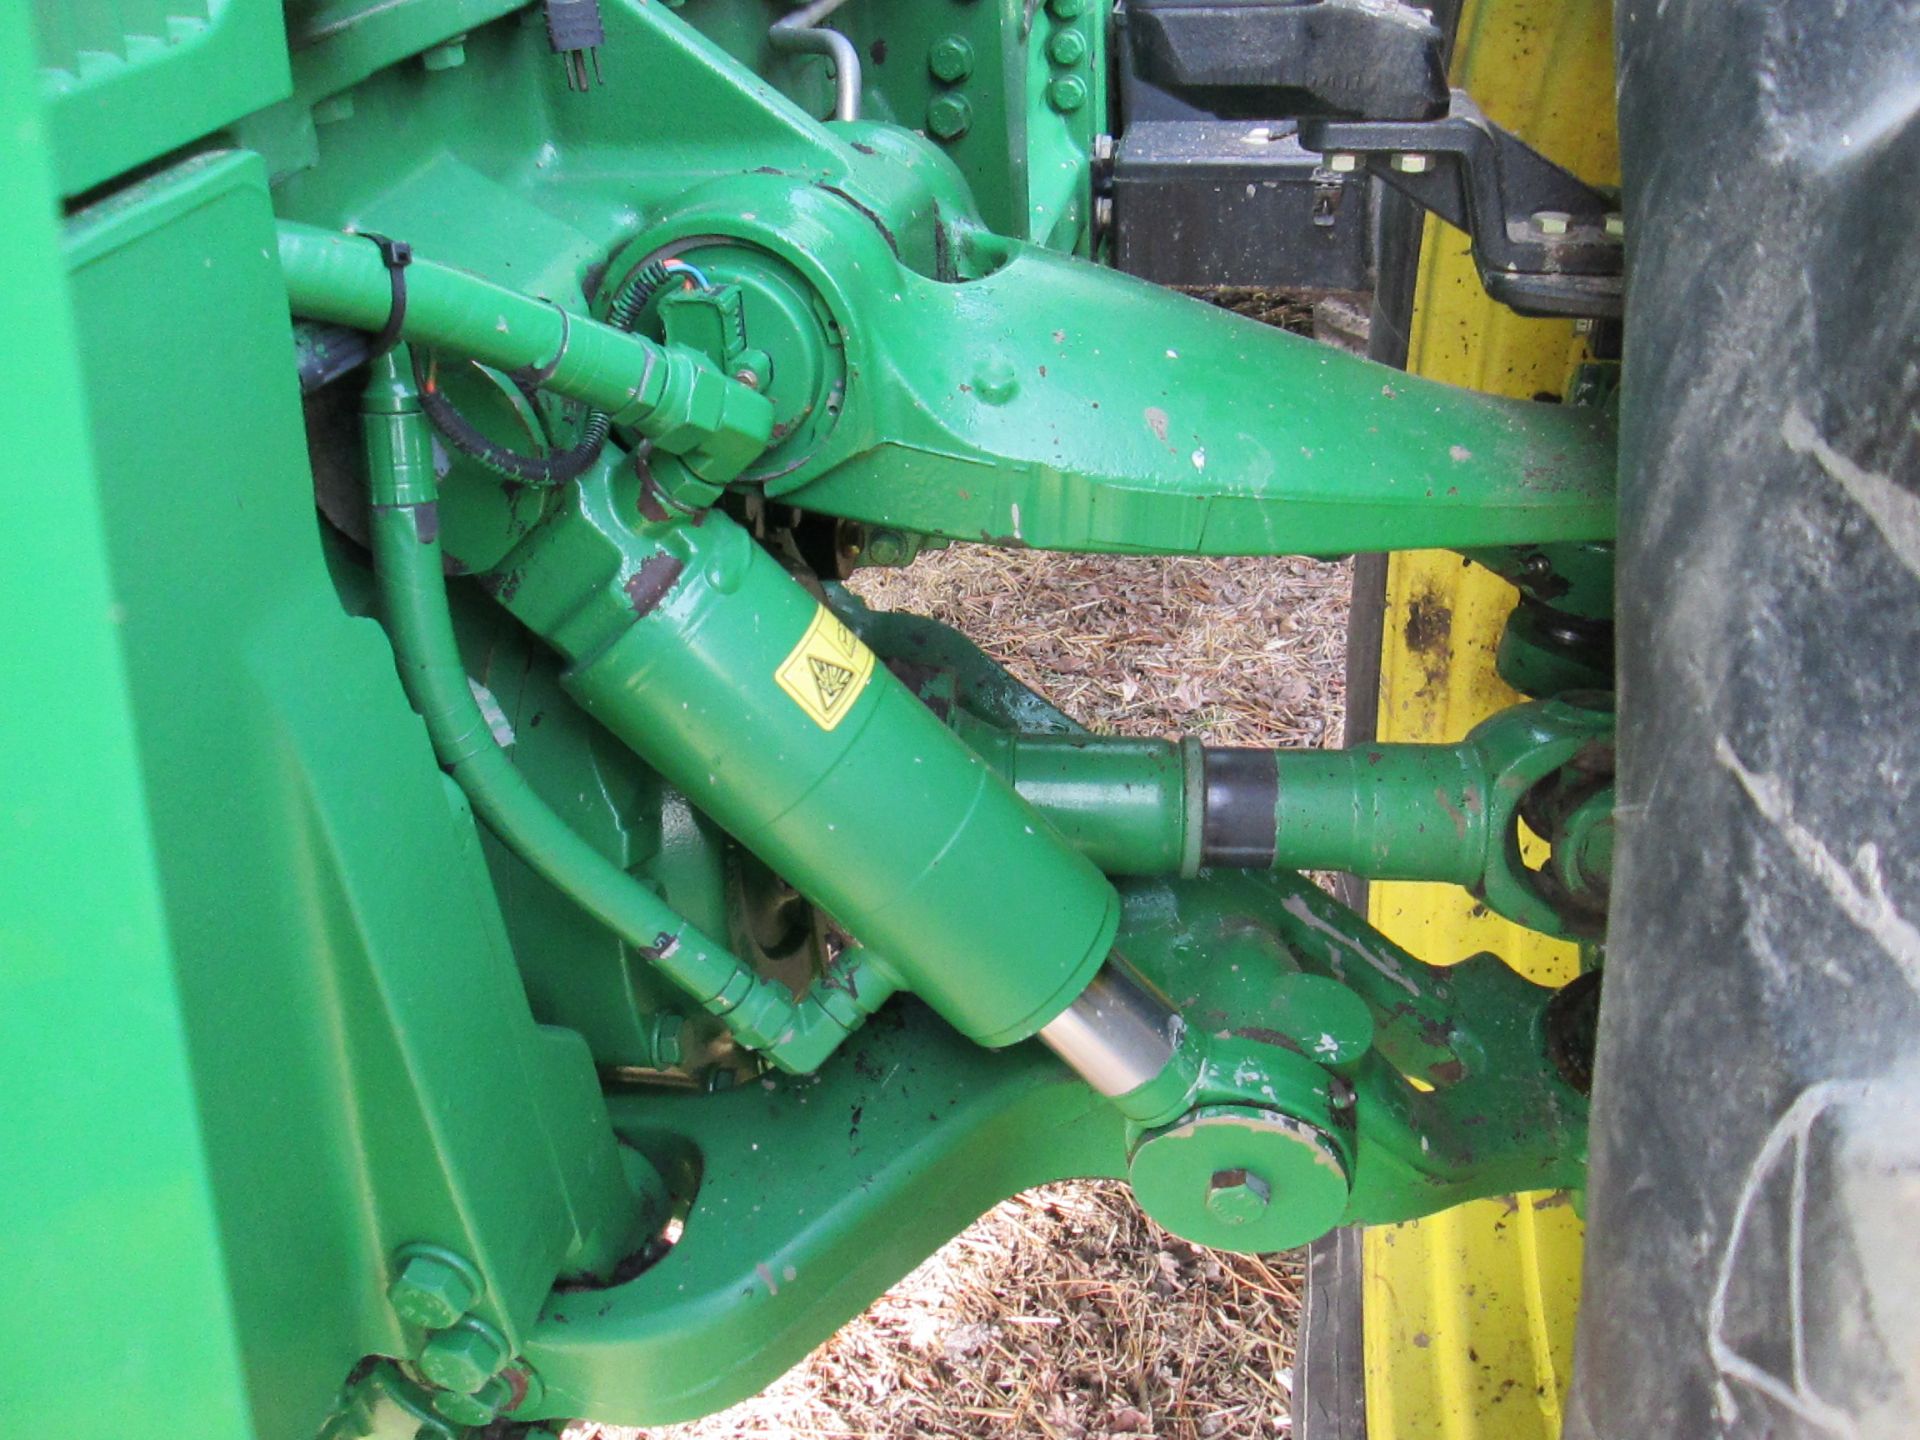 ’02 JD 8420 MFWD,(SN RW8420P007155)P.S.,FRONT SUSPENSION,GREENSTAR READY,480X50 DUALS,4921 HRS. - Image 12 of 19